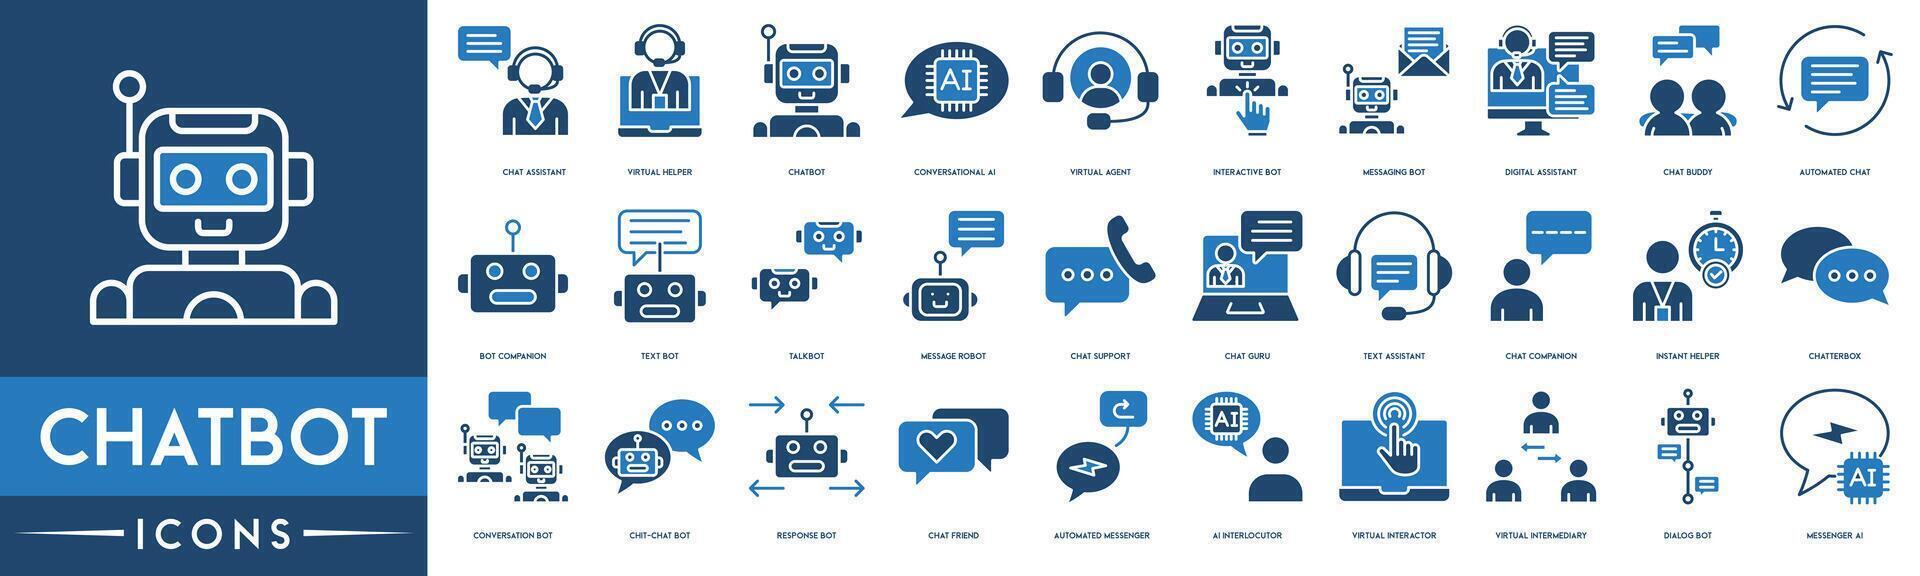 ChatBot  icon set. Included the icons as Chat Assistant, Virtual Helper, AI Chatbot, Messaging Bot, Automated Chat, Message Robot, Conversation Bot, Chat Friend, Dialog Bot and Messenger AI vector